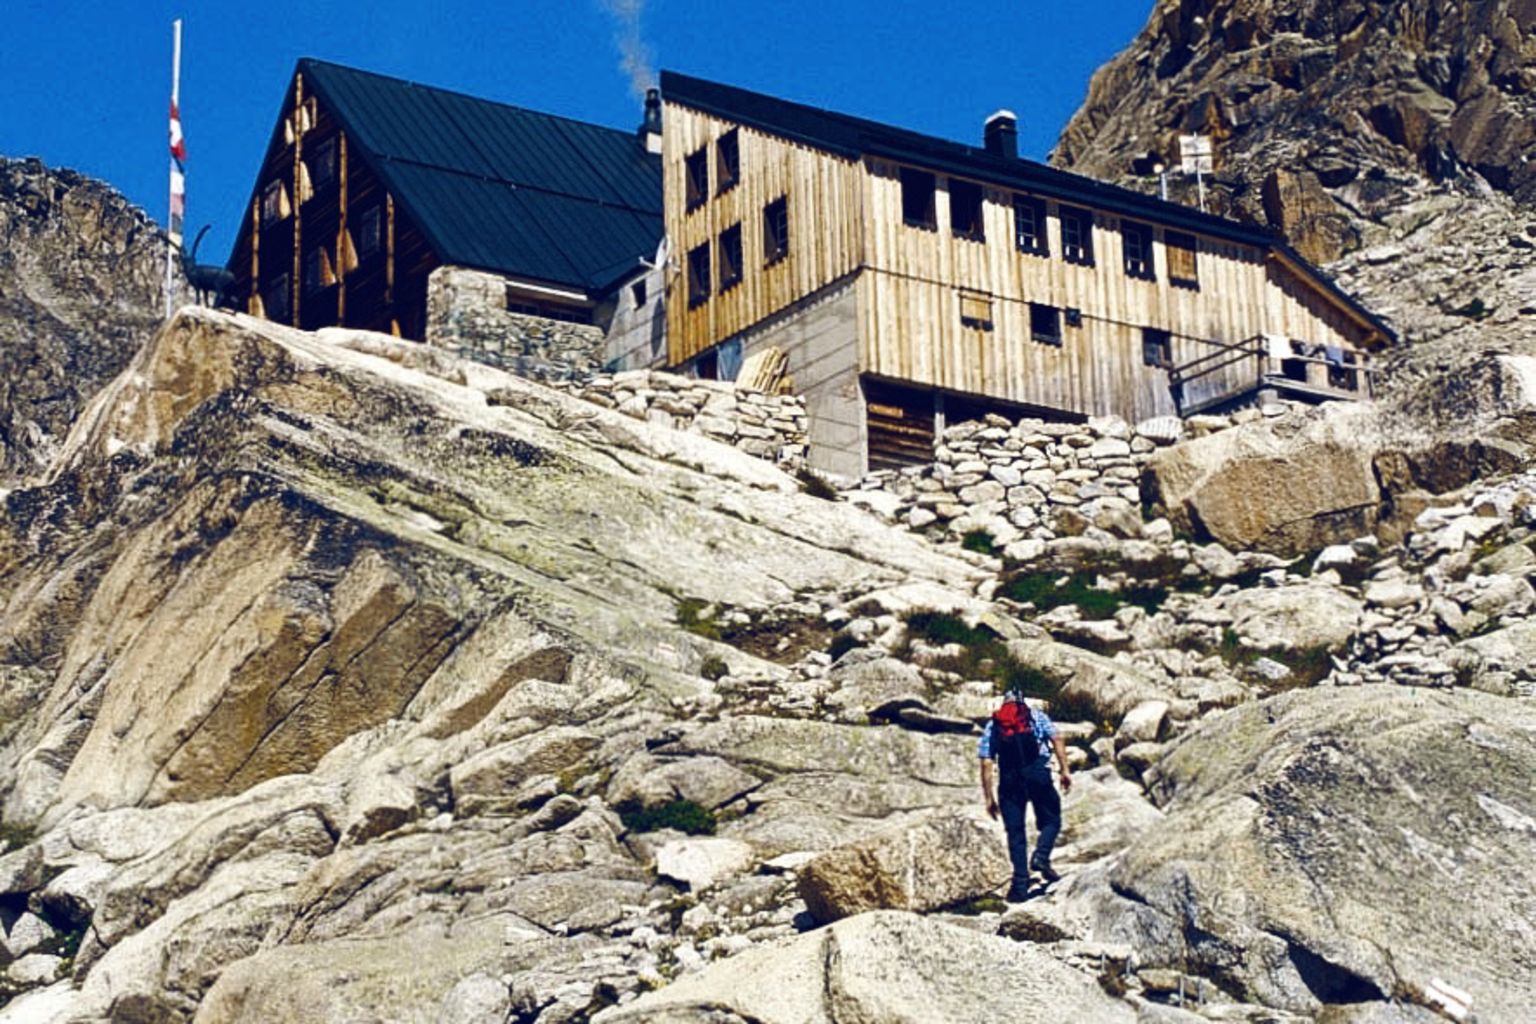 Cabane d'Orny CAS, mountain hut at the swiss alps in Valais